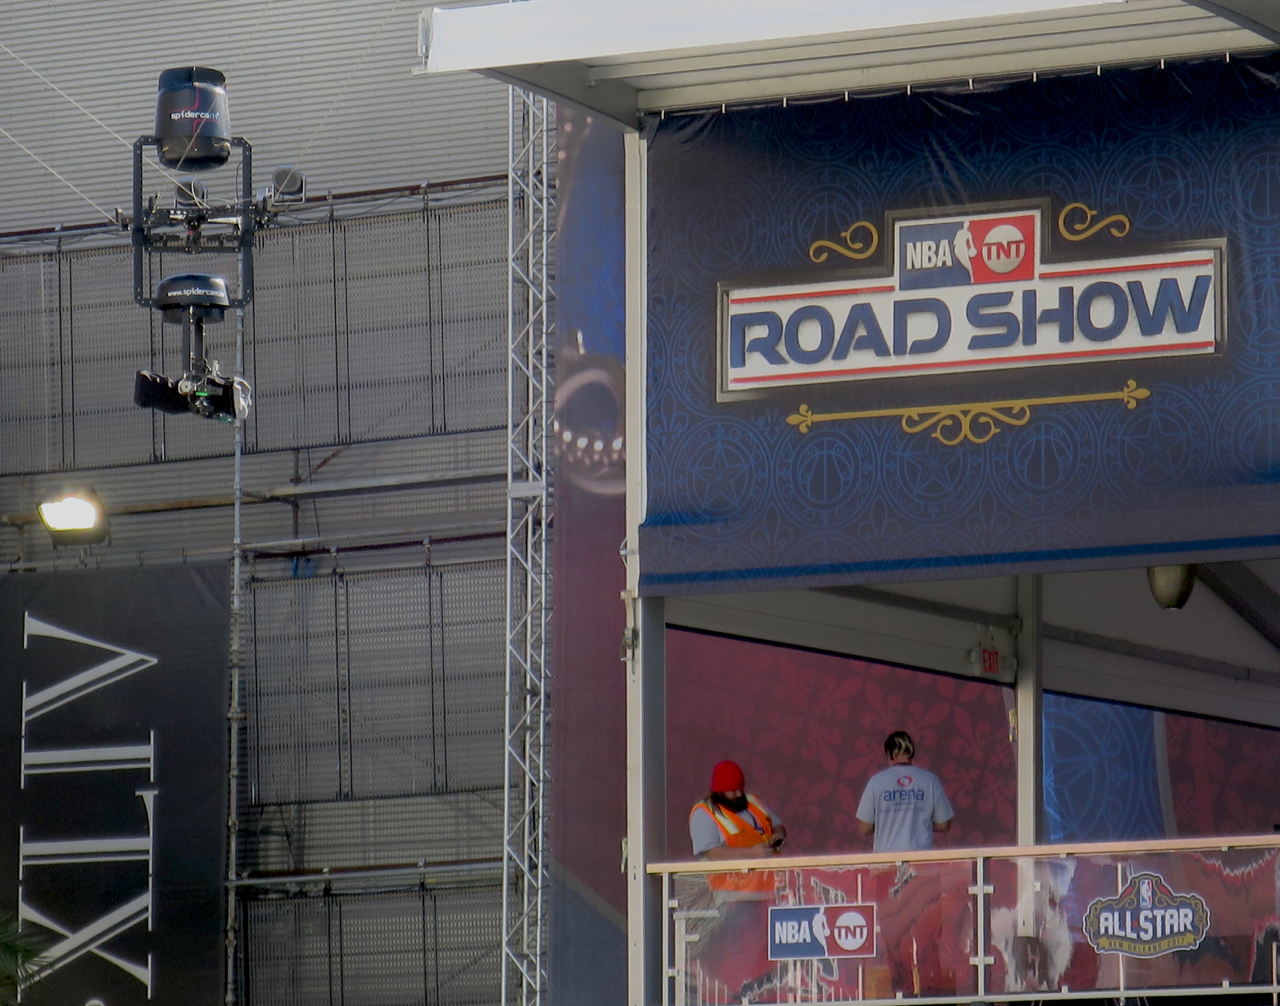 A point-to-point Spidercam is flying over the NBA on TNT Road Show.